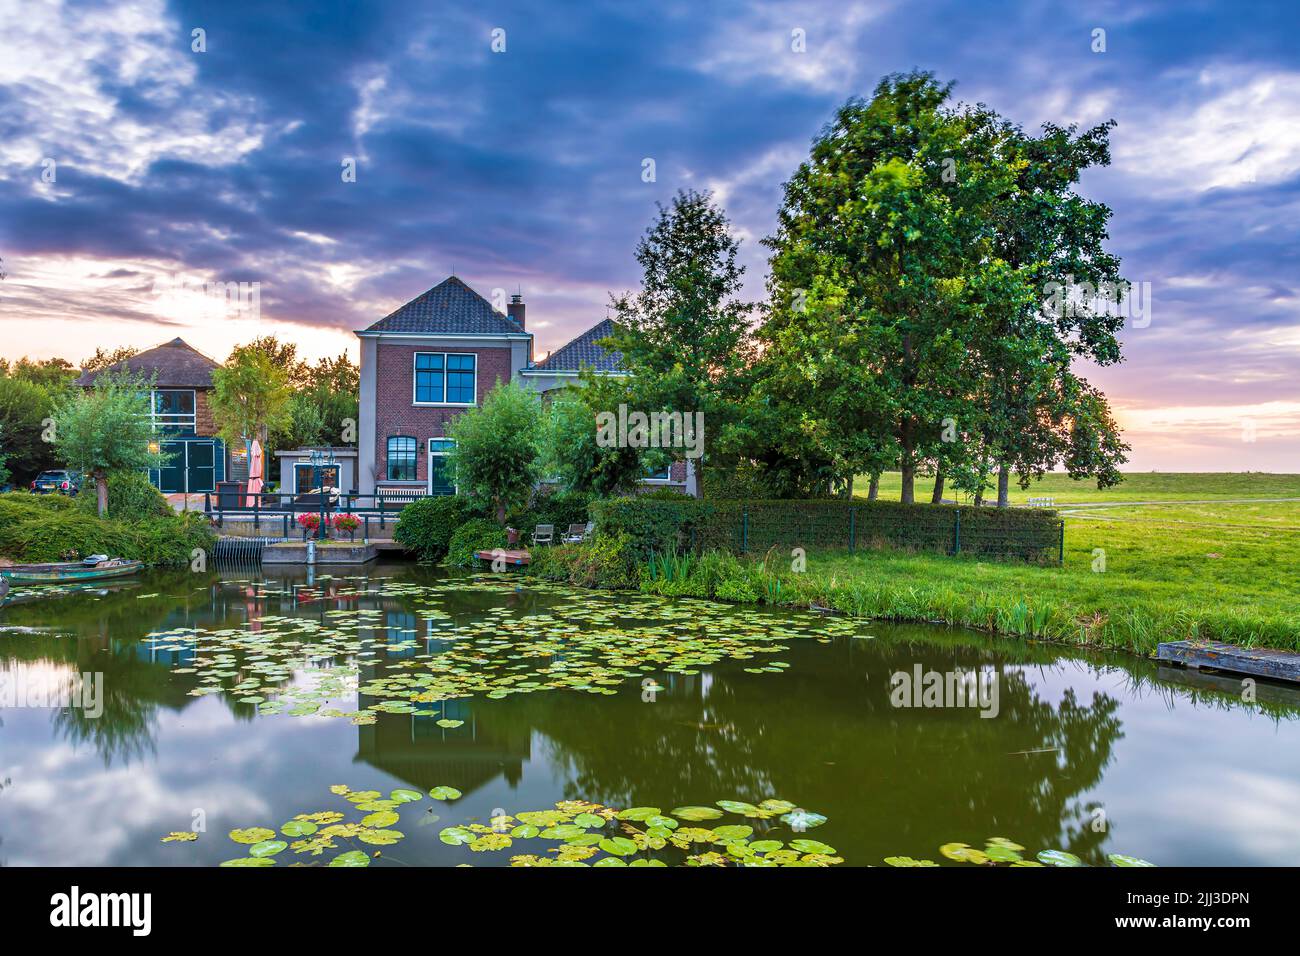 Dutch pumping station gemaal Palenstein Zoetermeer at water during a beautiful sunset Stock Photo